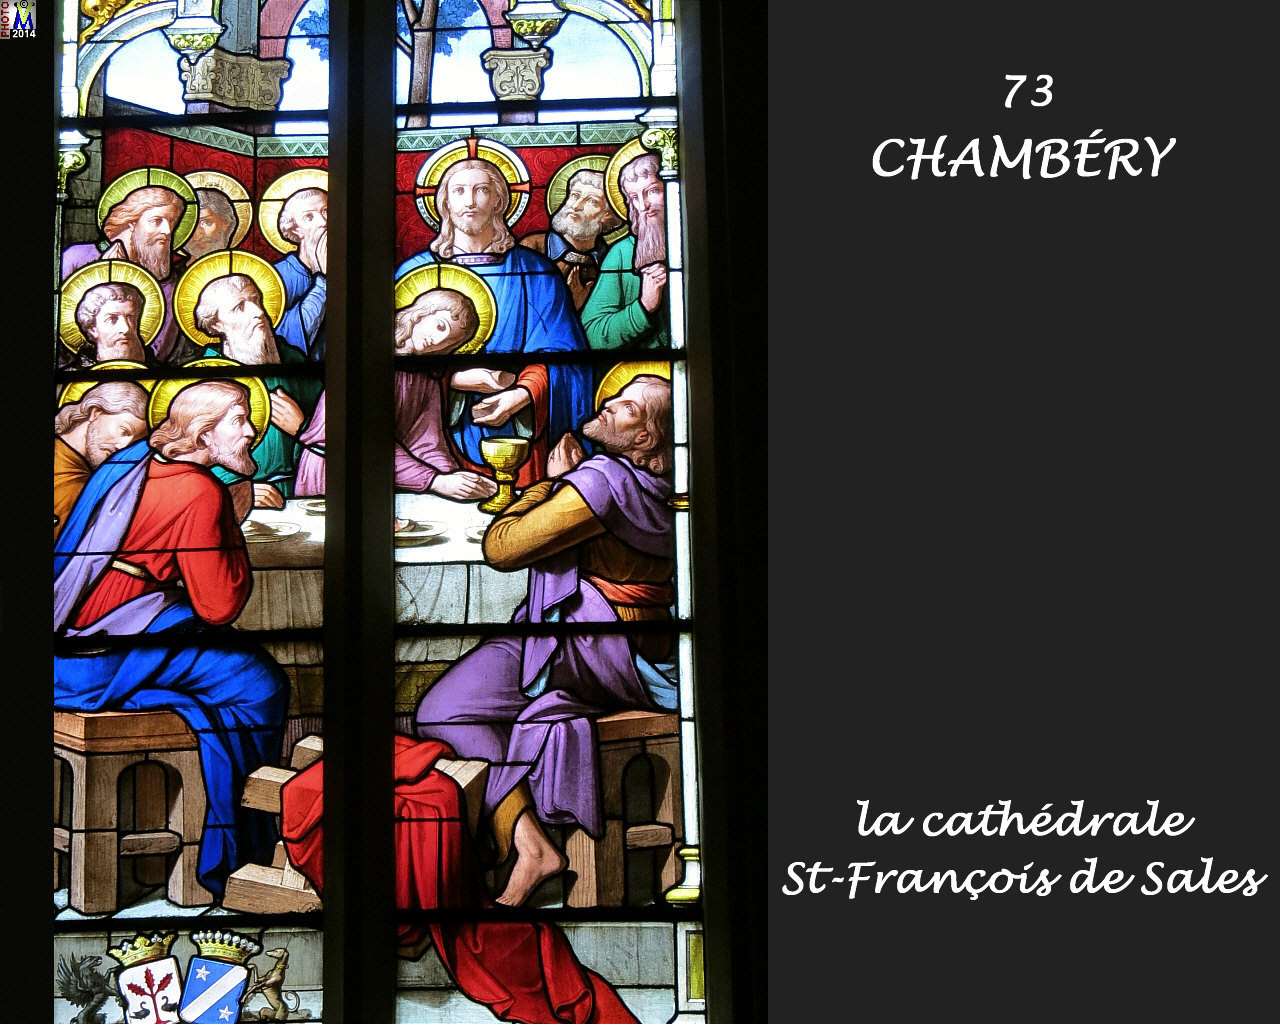 73CHAMBERY_cathedrale_216.jpg